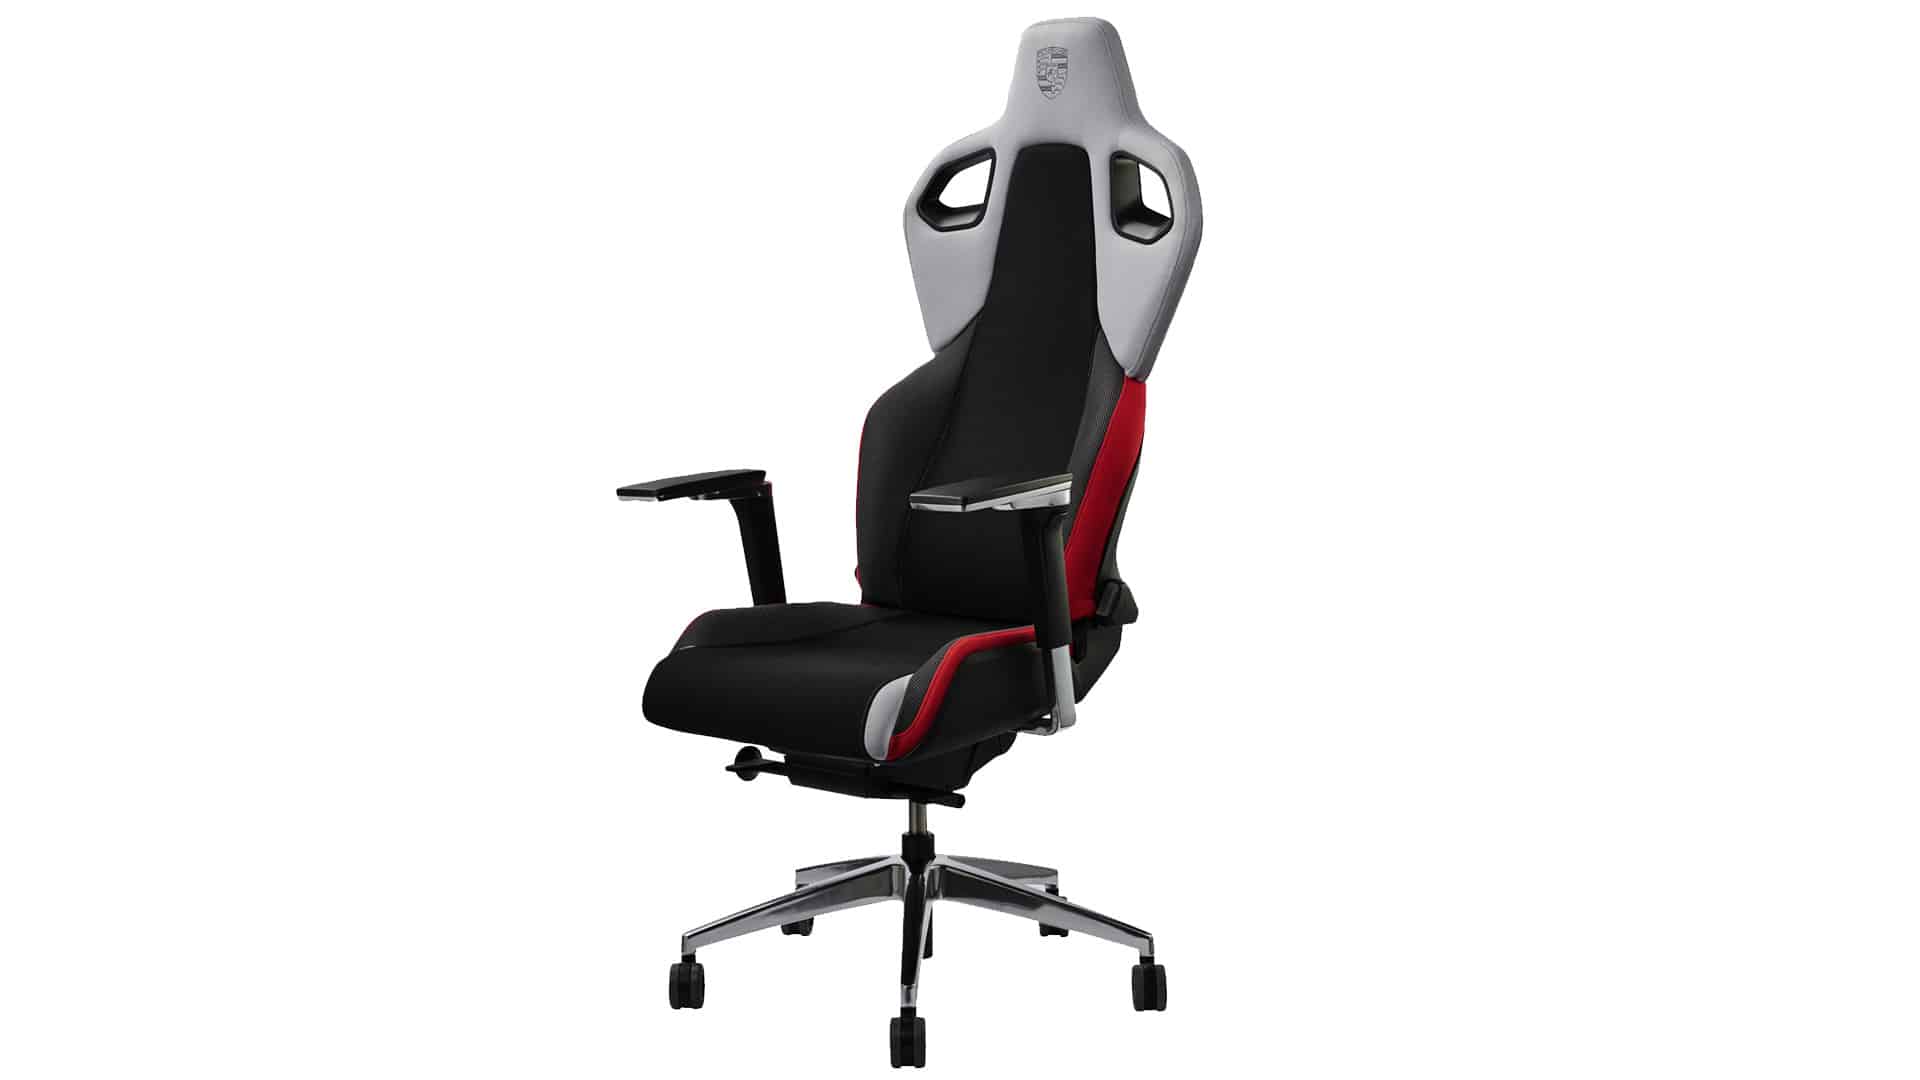 Porsche launches gaming chair in partnership with Recaro